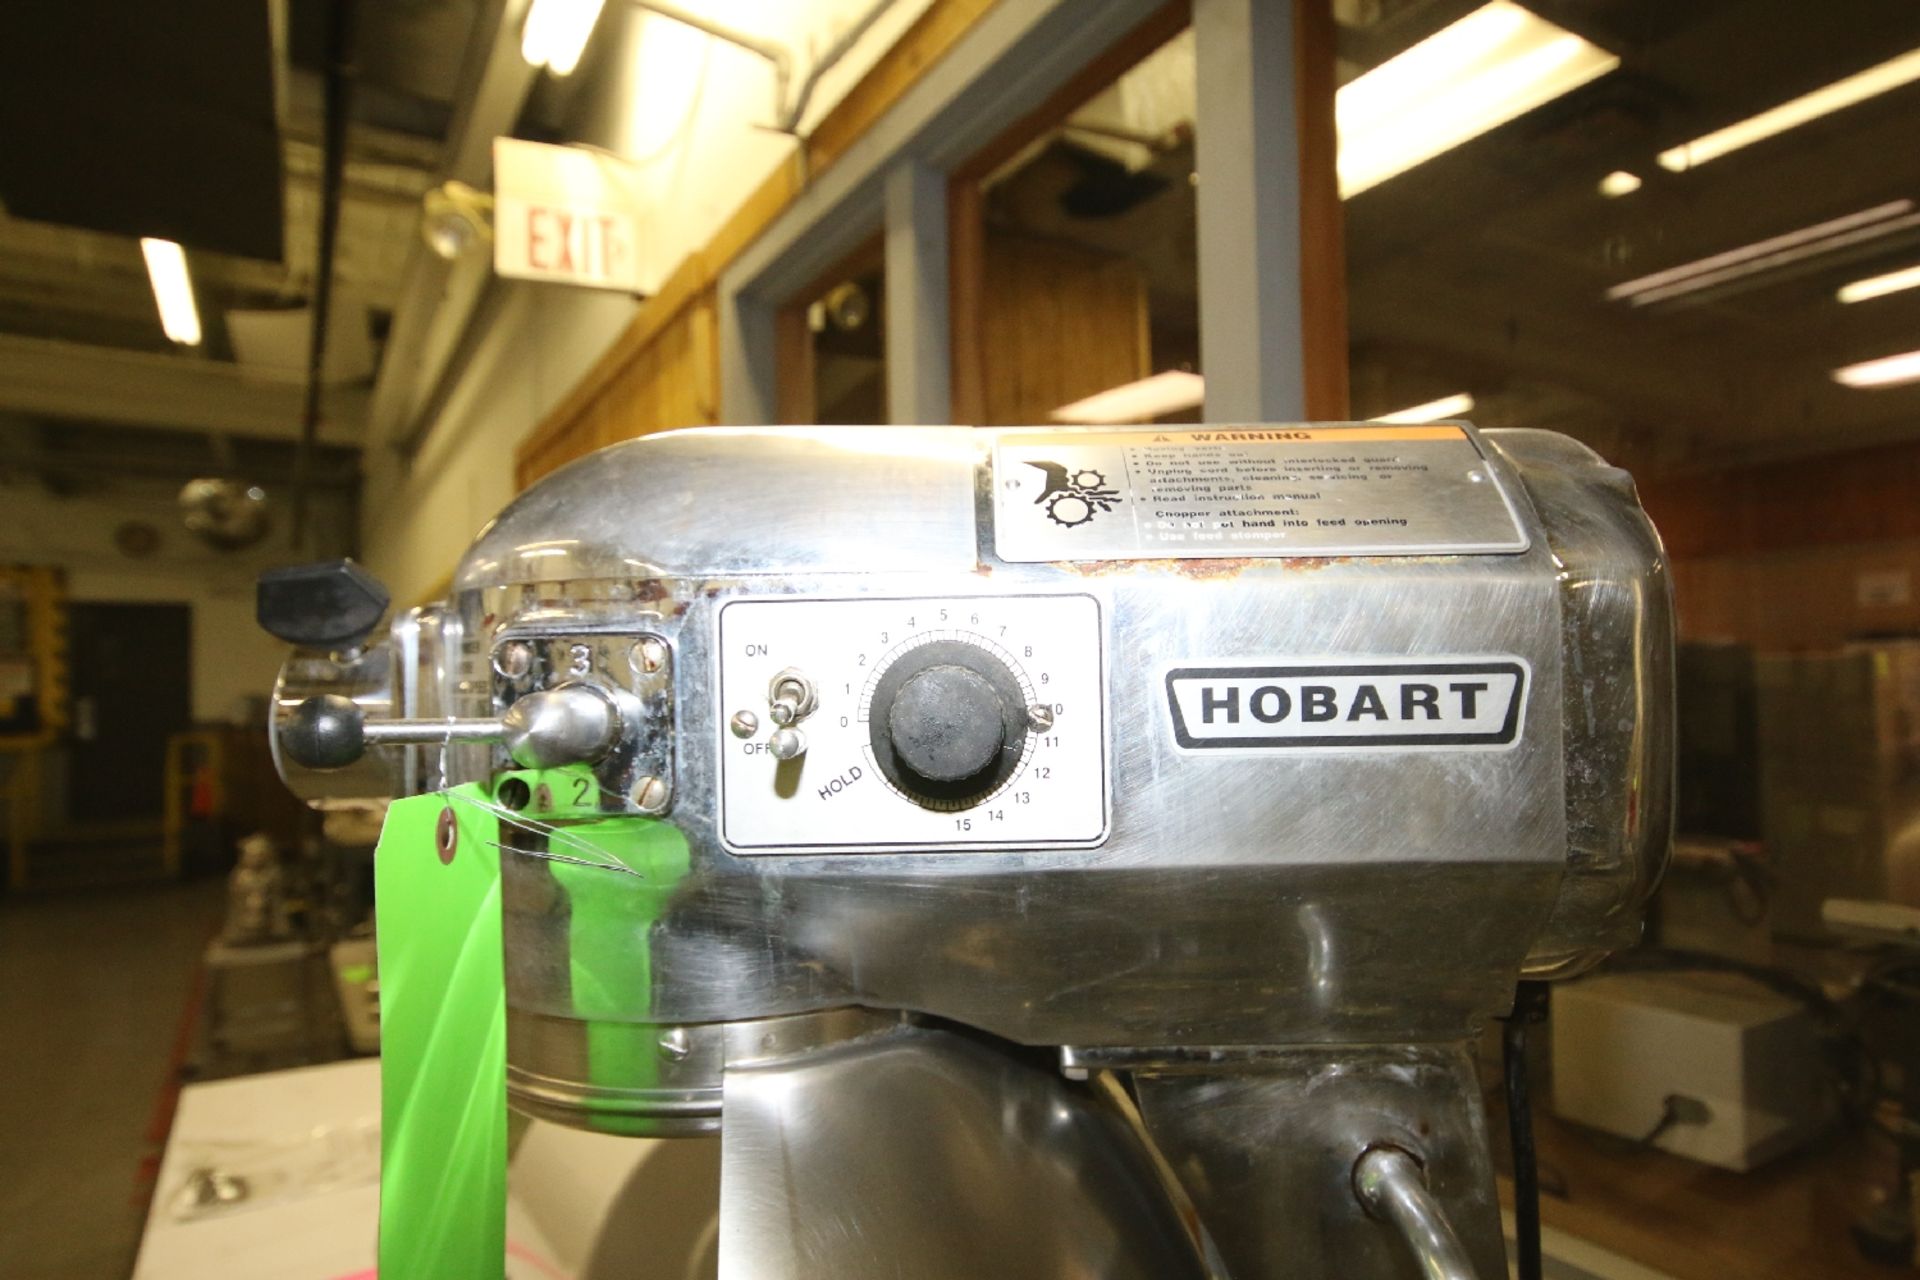 Hobart S/S Table Top Mixer, Model A-200DT, S/N 1-1195-005 with 12" W x 11" Deep S/S Mixing Bowl, - Image 3 of 5